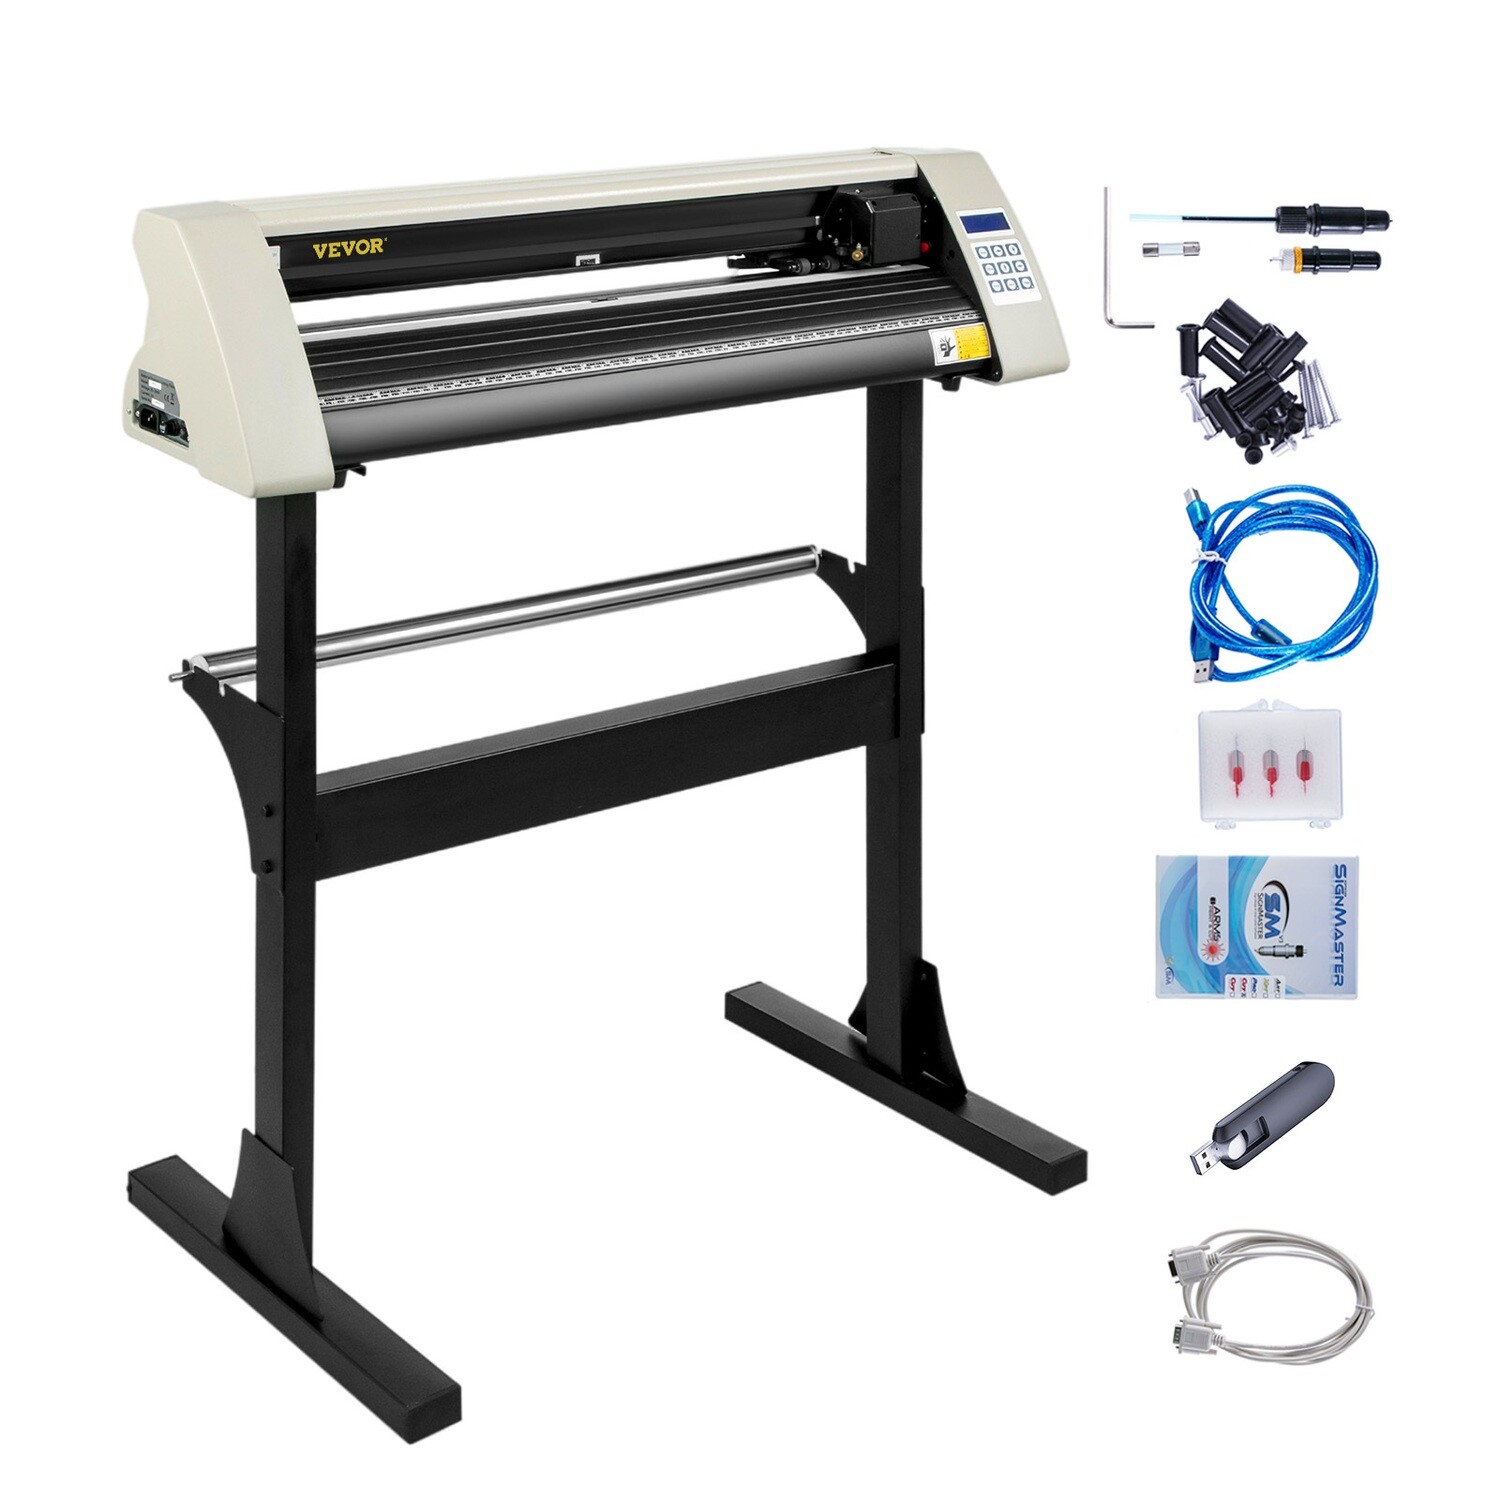 Vinyl Cutting Machine, 28", 720mm, with Stand Signmaster Cutting with a vinyl plotter